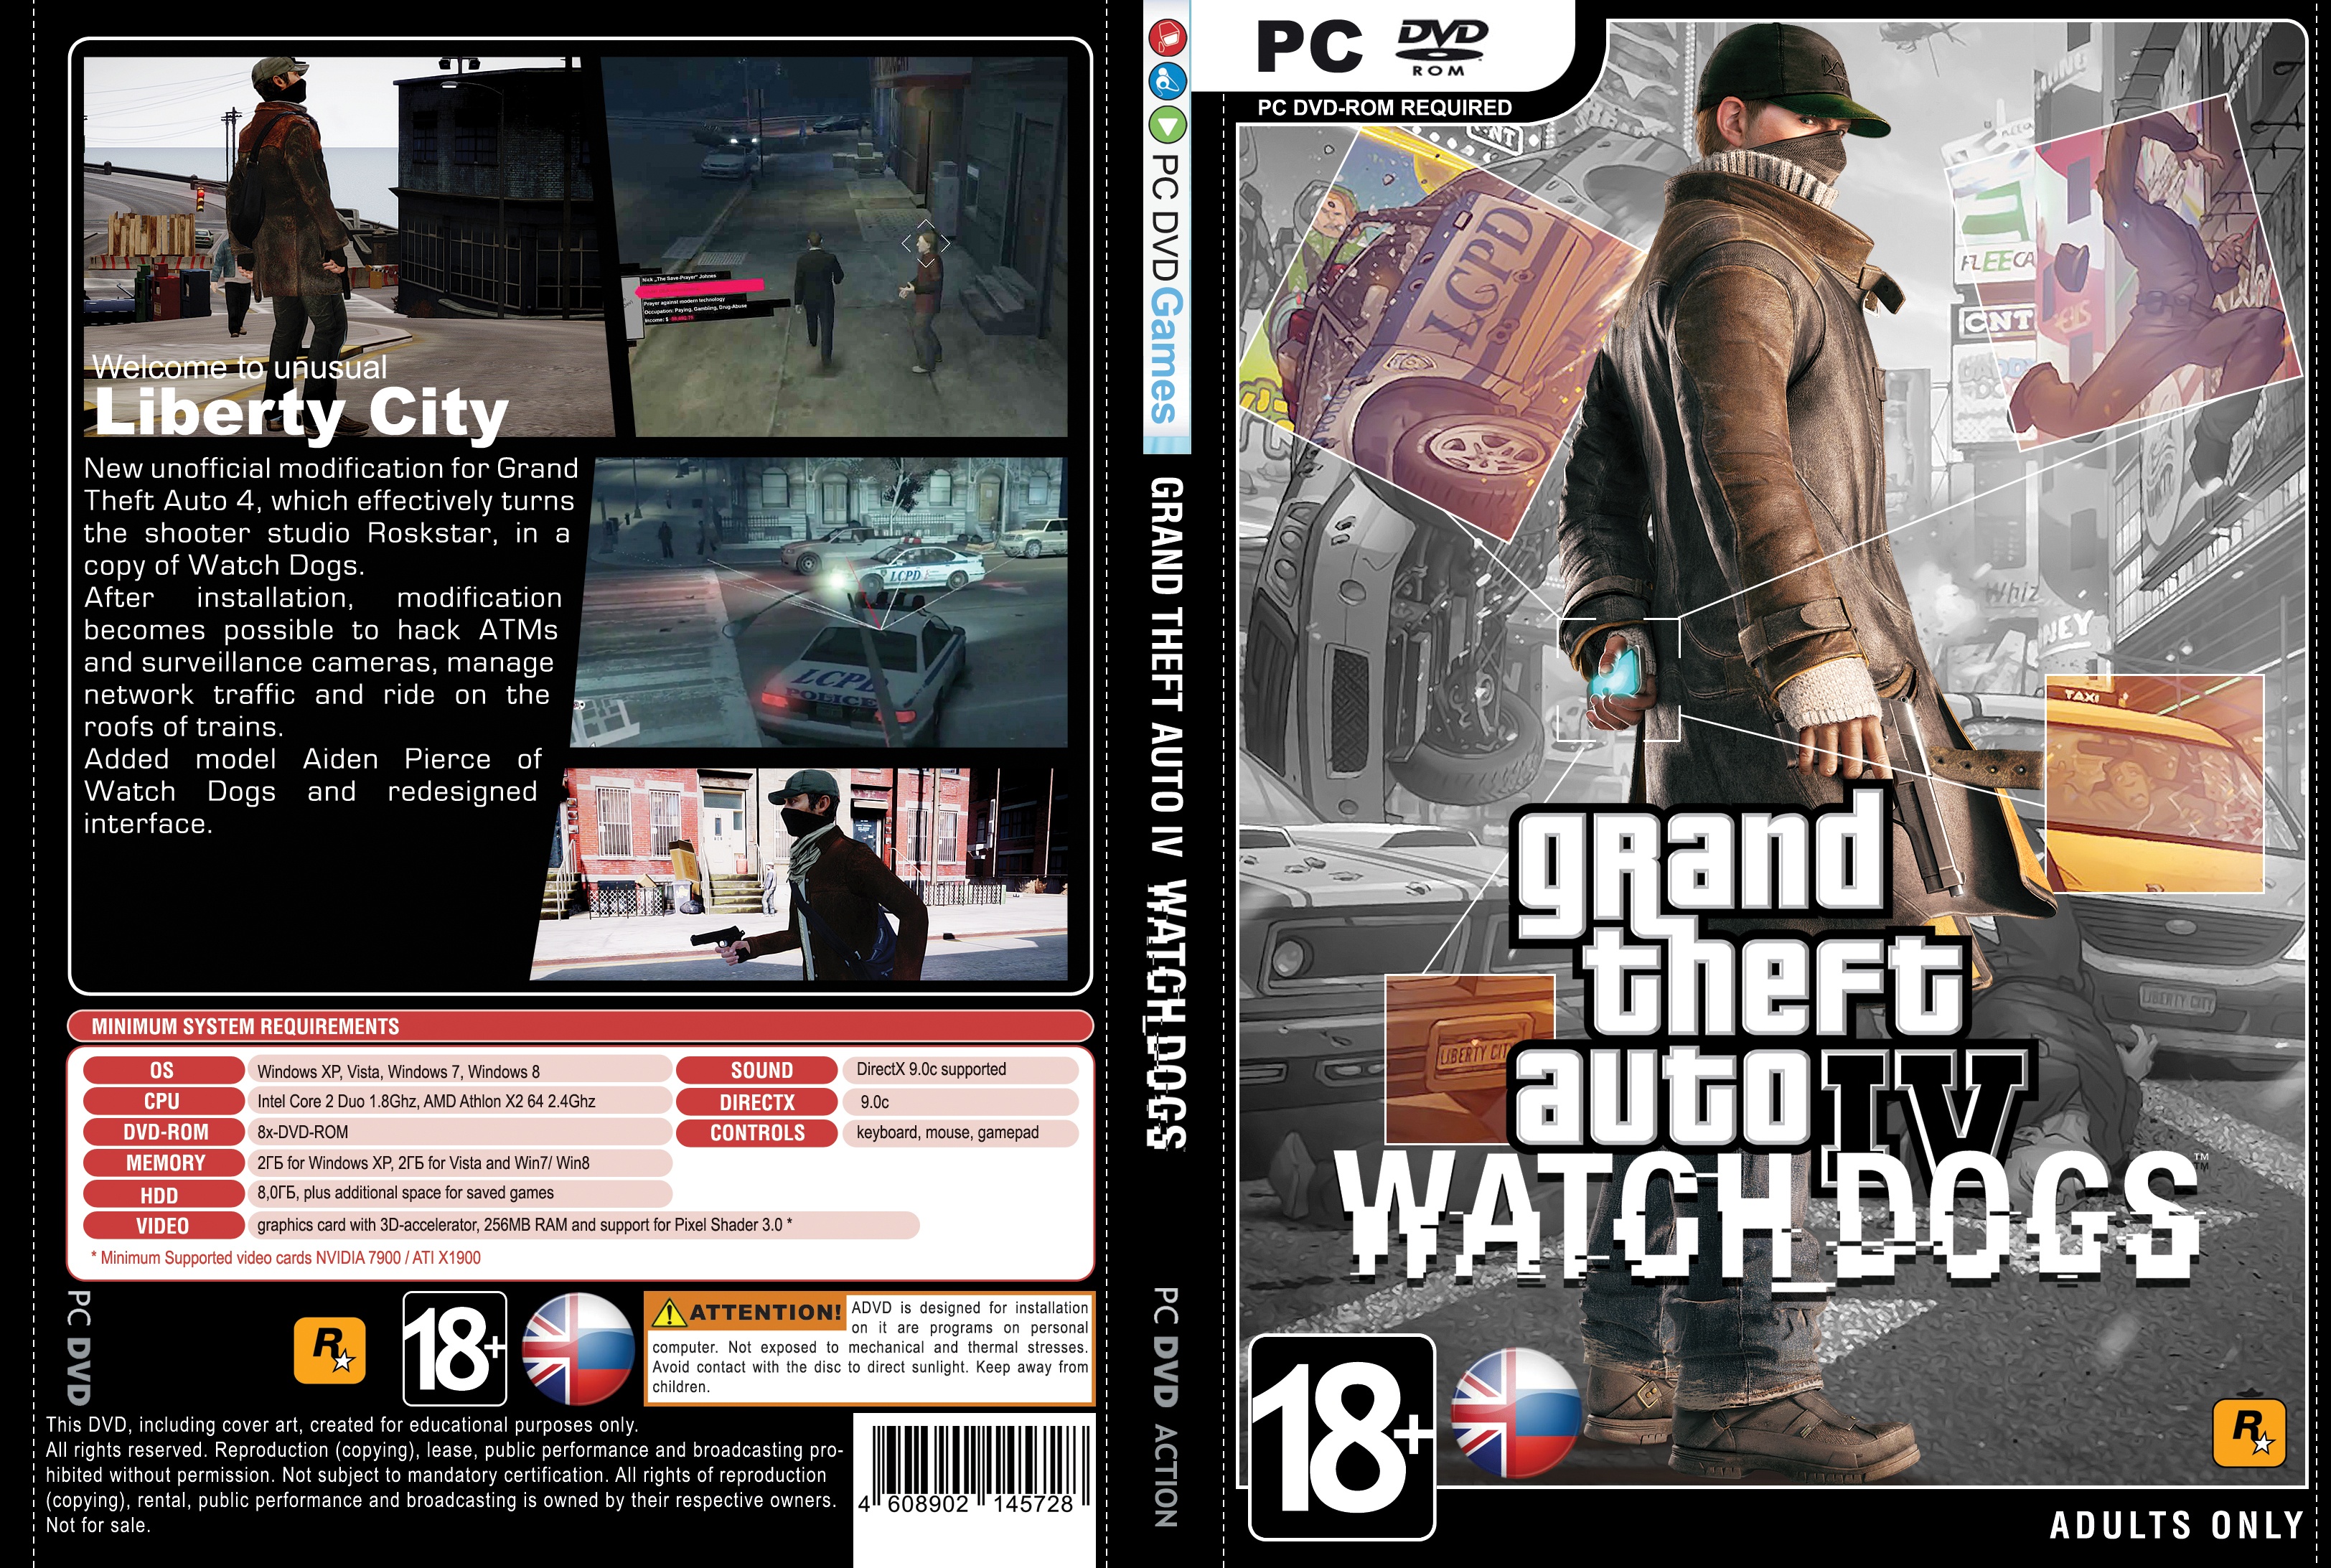 Grand Theft Auto Sleeping Dogs box cover